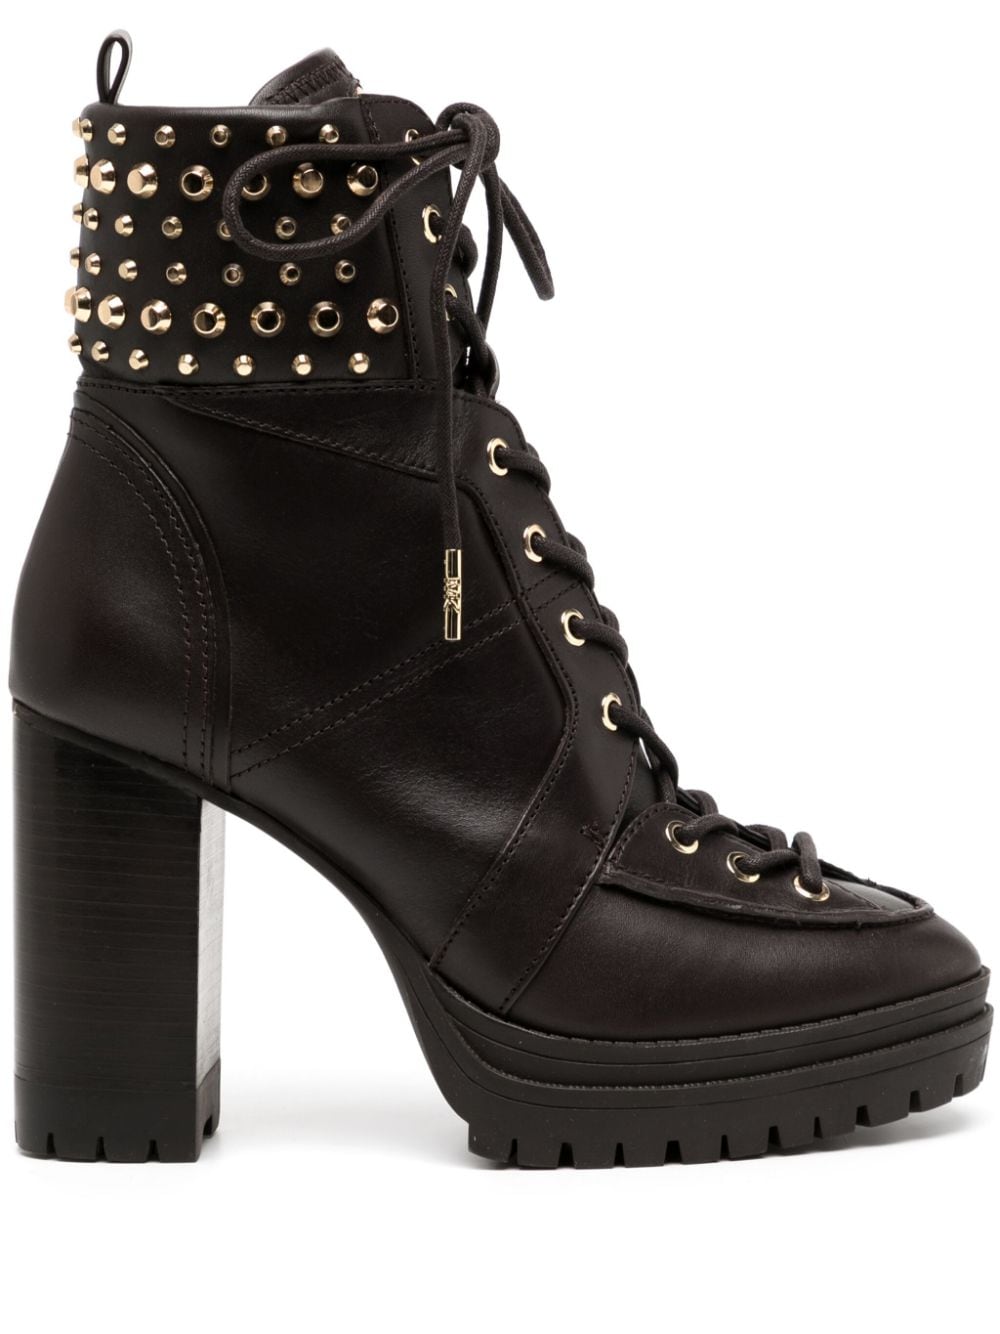 Michael Kors Women's Yvonne Studded Lace Up Platform Booties In Chocolate